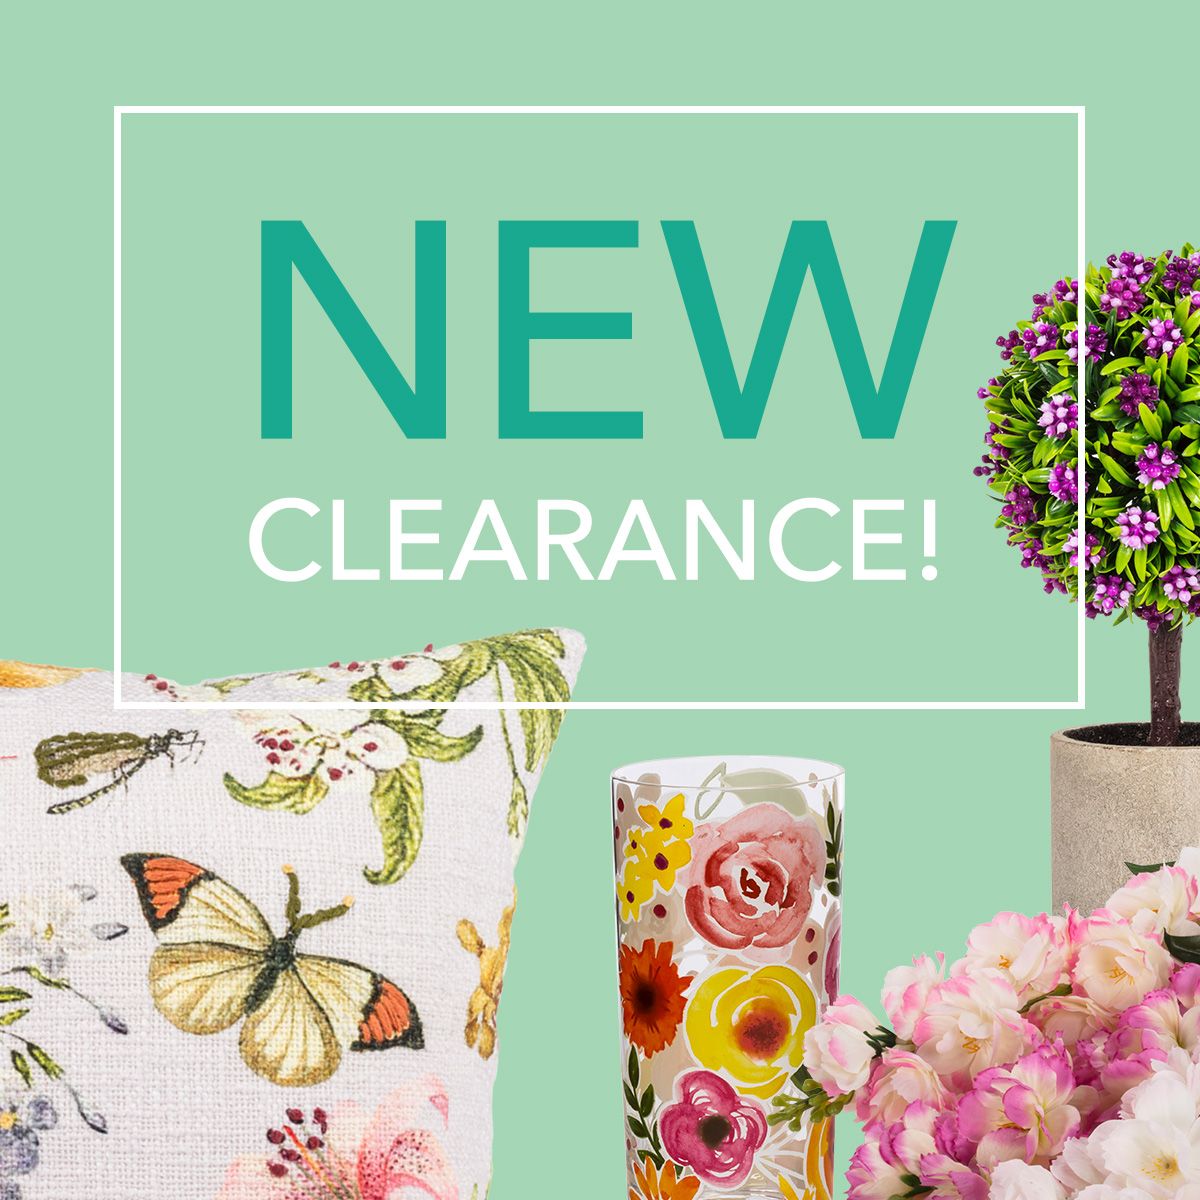 New Clearance just dropped! Limited stock, big savings! Stock up on fabulous décor, tableware and accessories at unbeatable prices. Don’t miss out on this huge sale! ✨️😀💛⁠